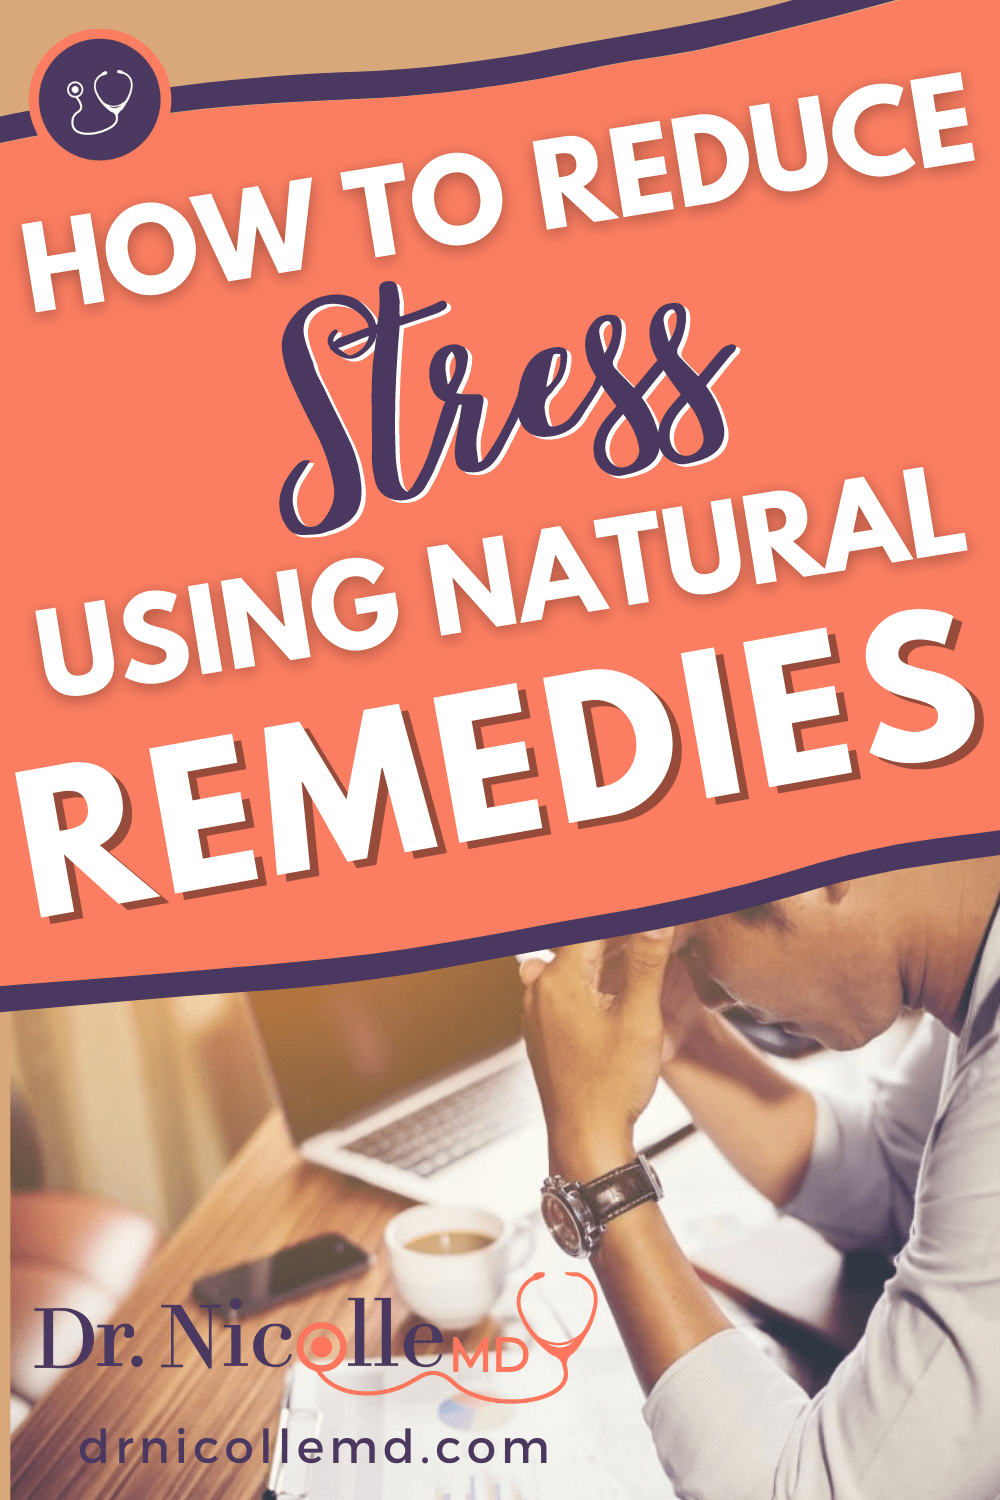 How To Reduce Stress Using Natural Remedies